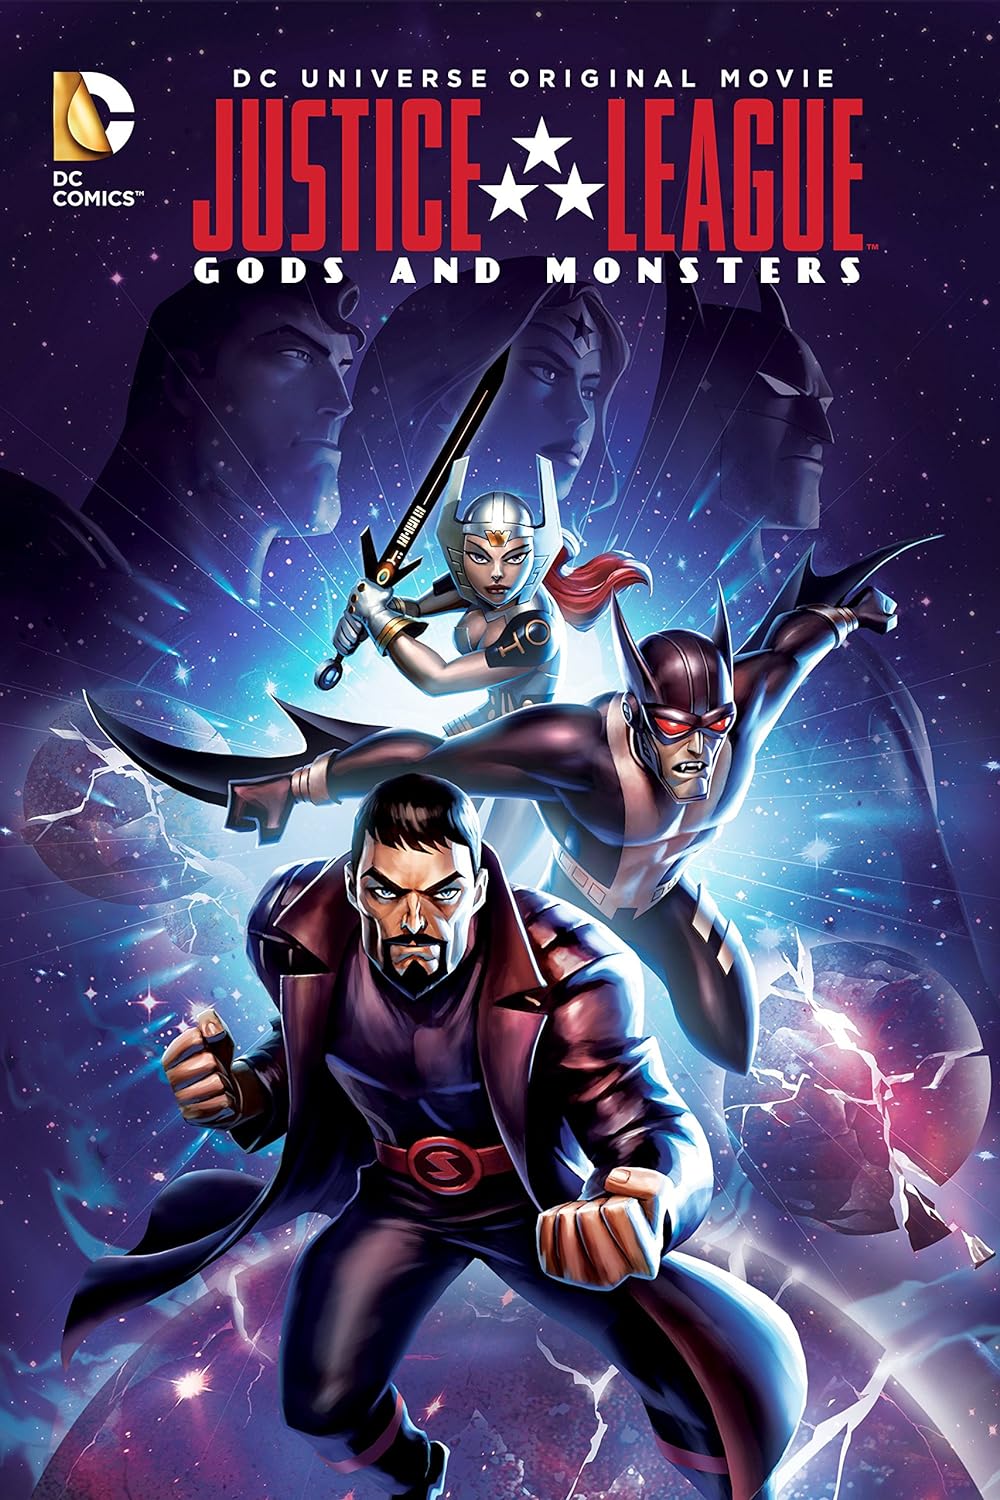 FULL MOVIE: Justice League: Gods and Monsters (2015)